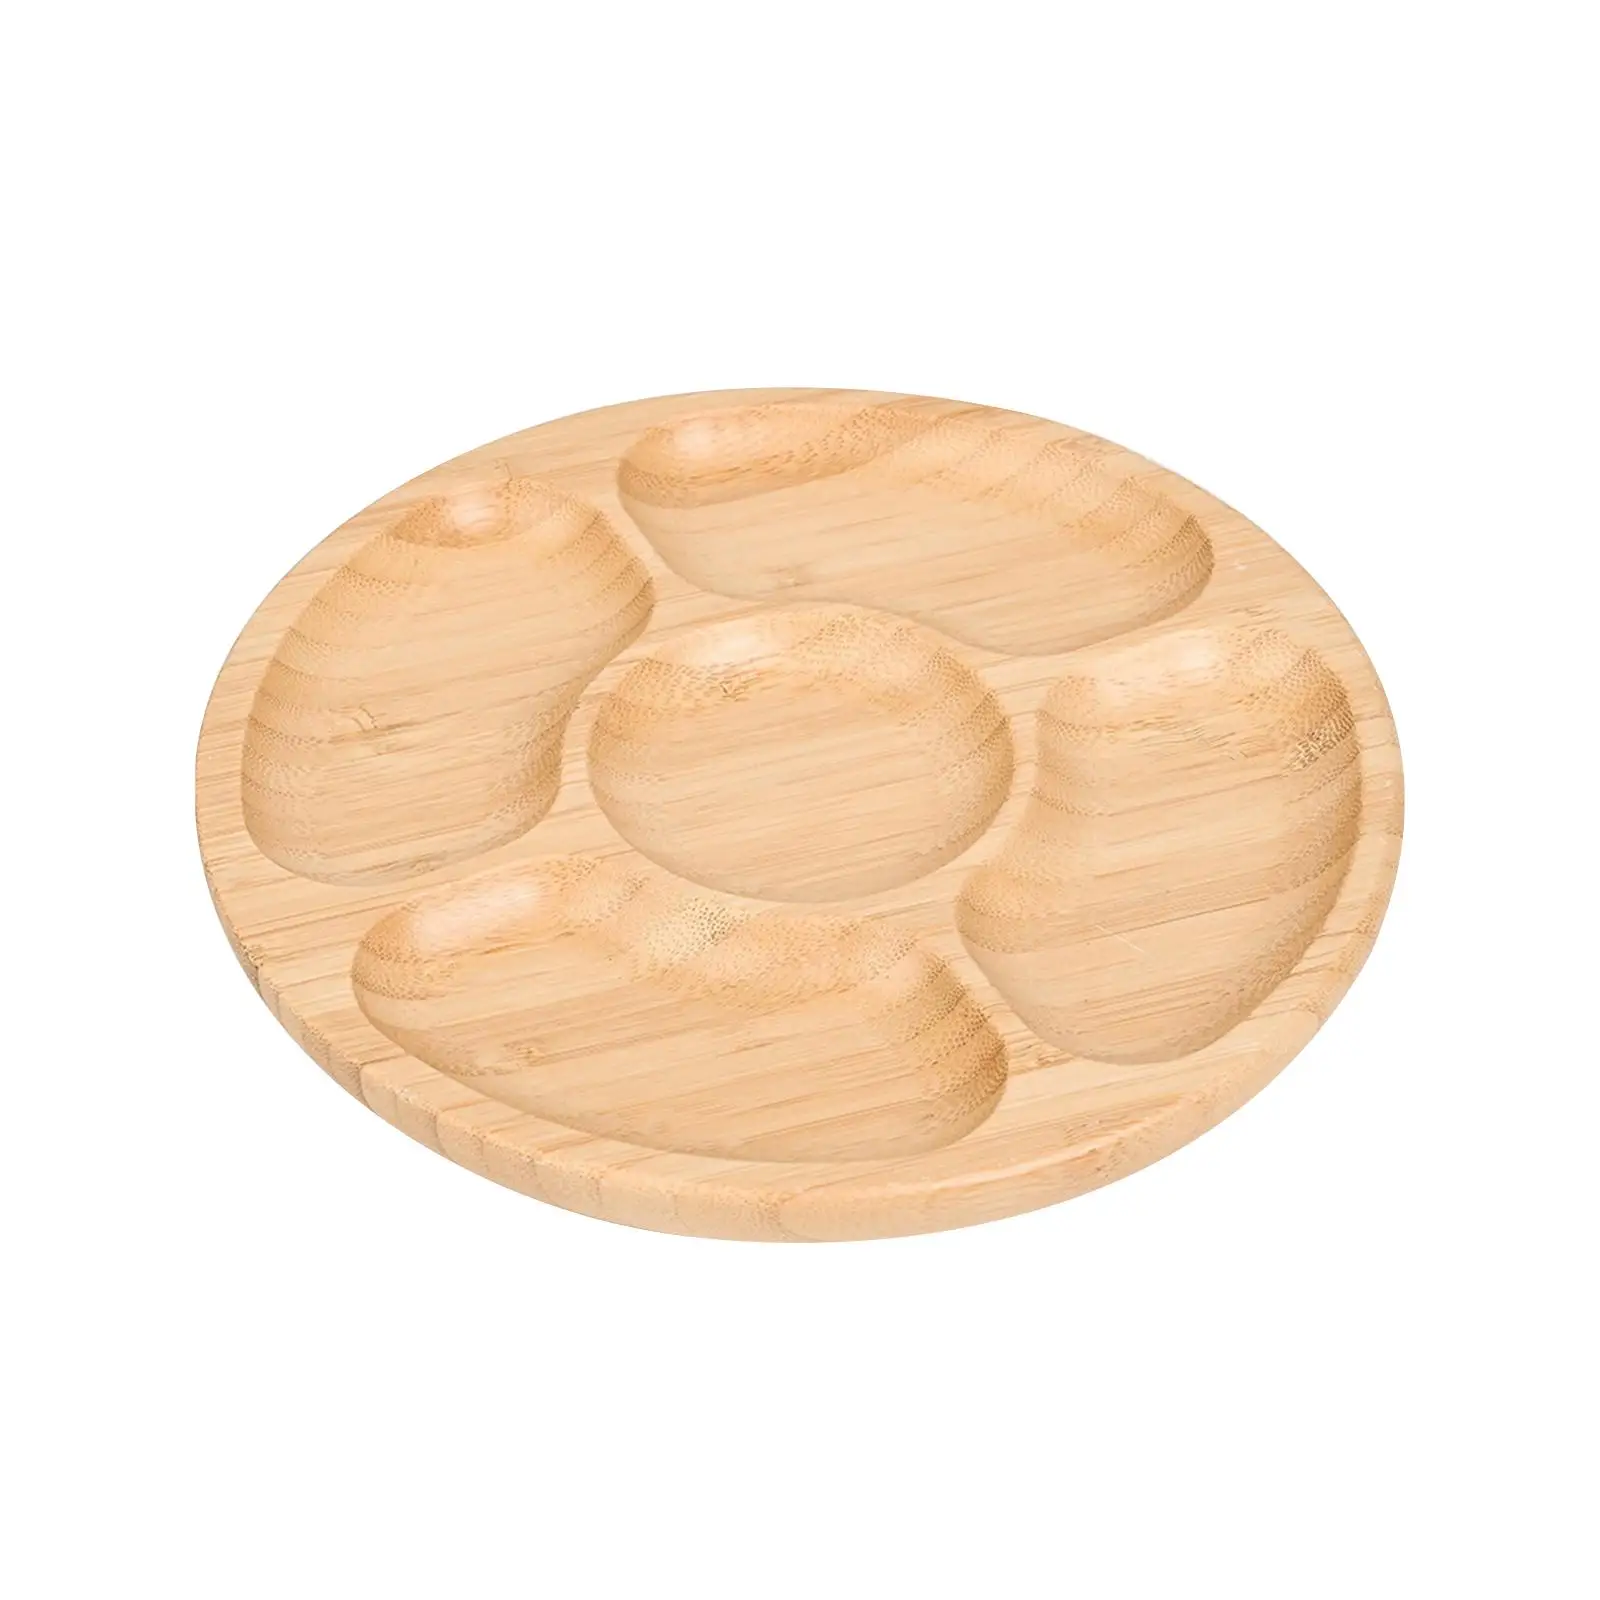 Wooden Tray Wooden Serving Tray 5 Section Wooden Tea Trays Decor Display Round Wood Tray for Candies Dinner Party Vegetable